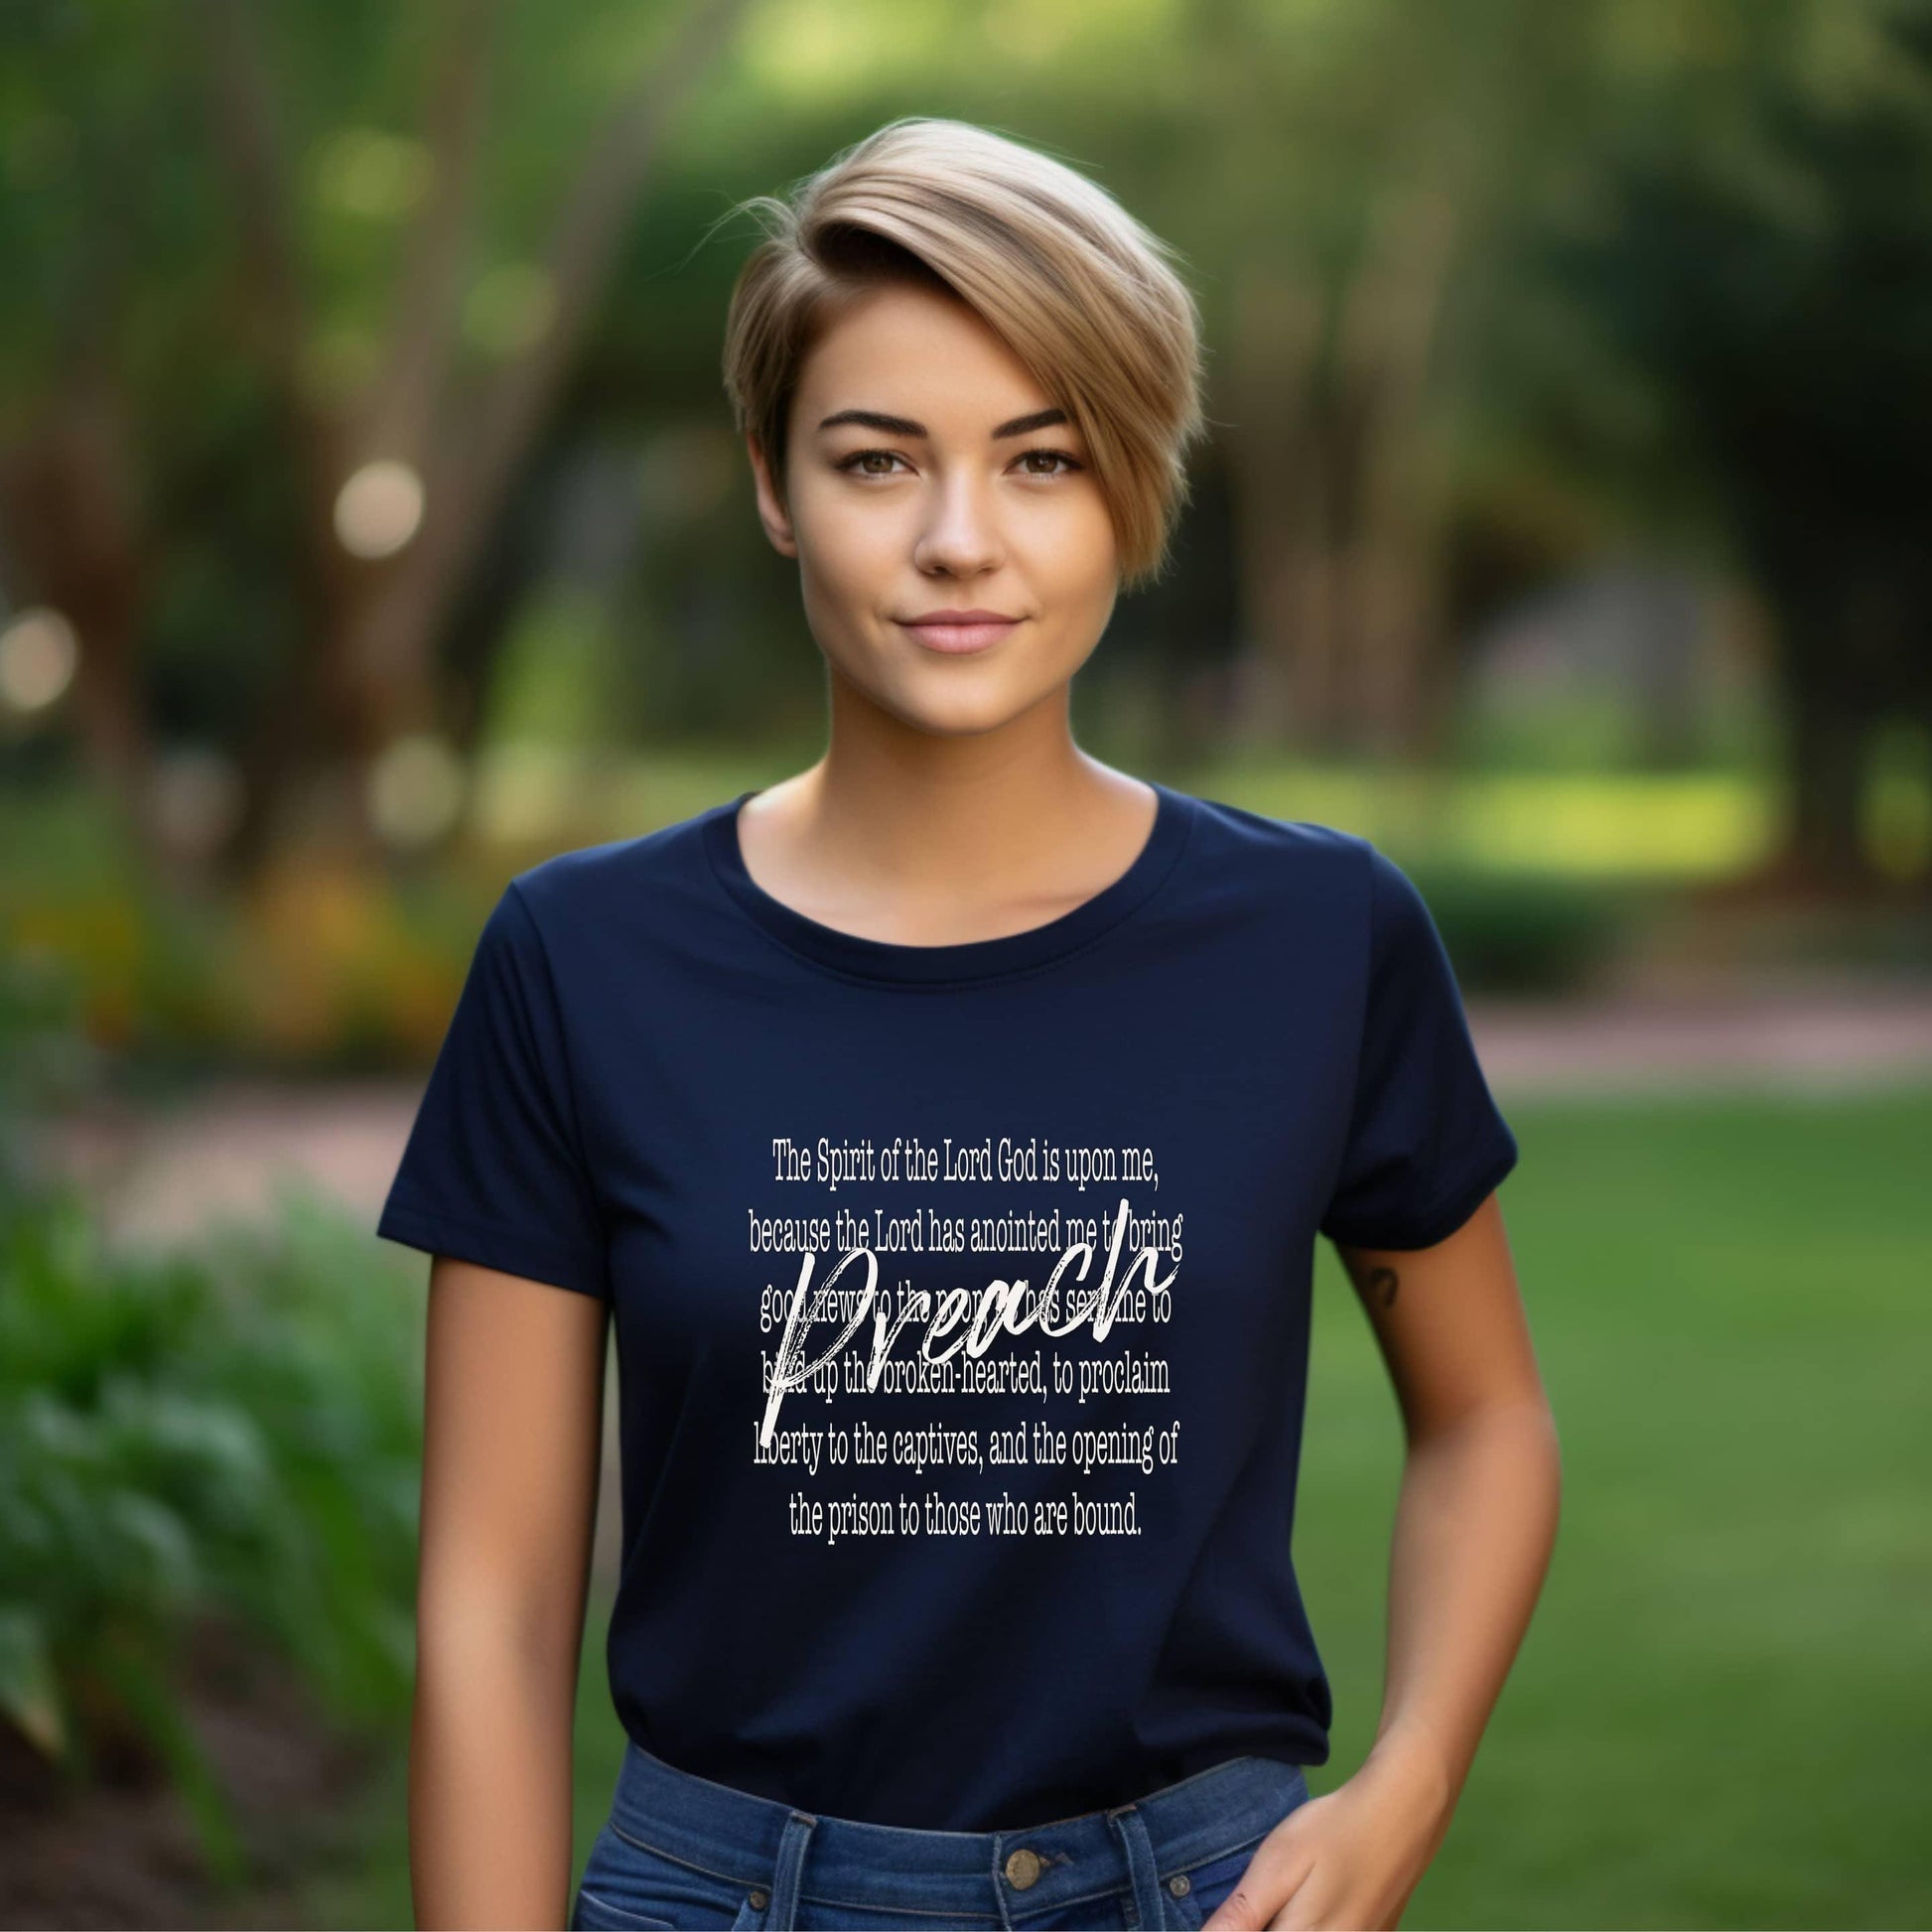 Preach The Spirit Of The Lord Is Upon Me Women’s Tee - JT Footprint Apparel